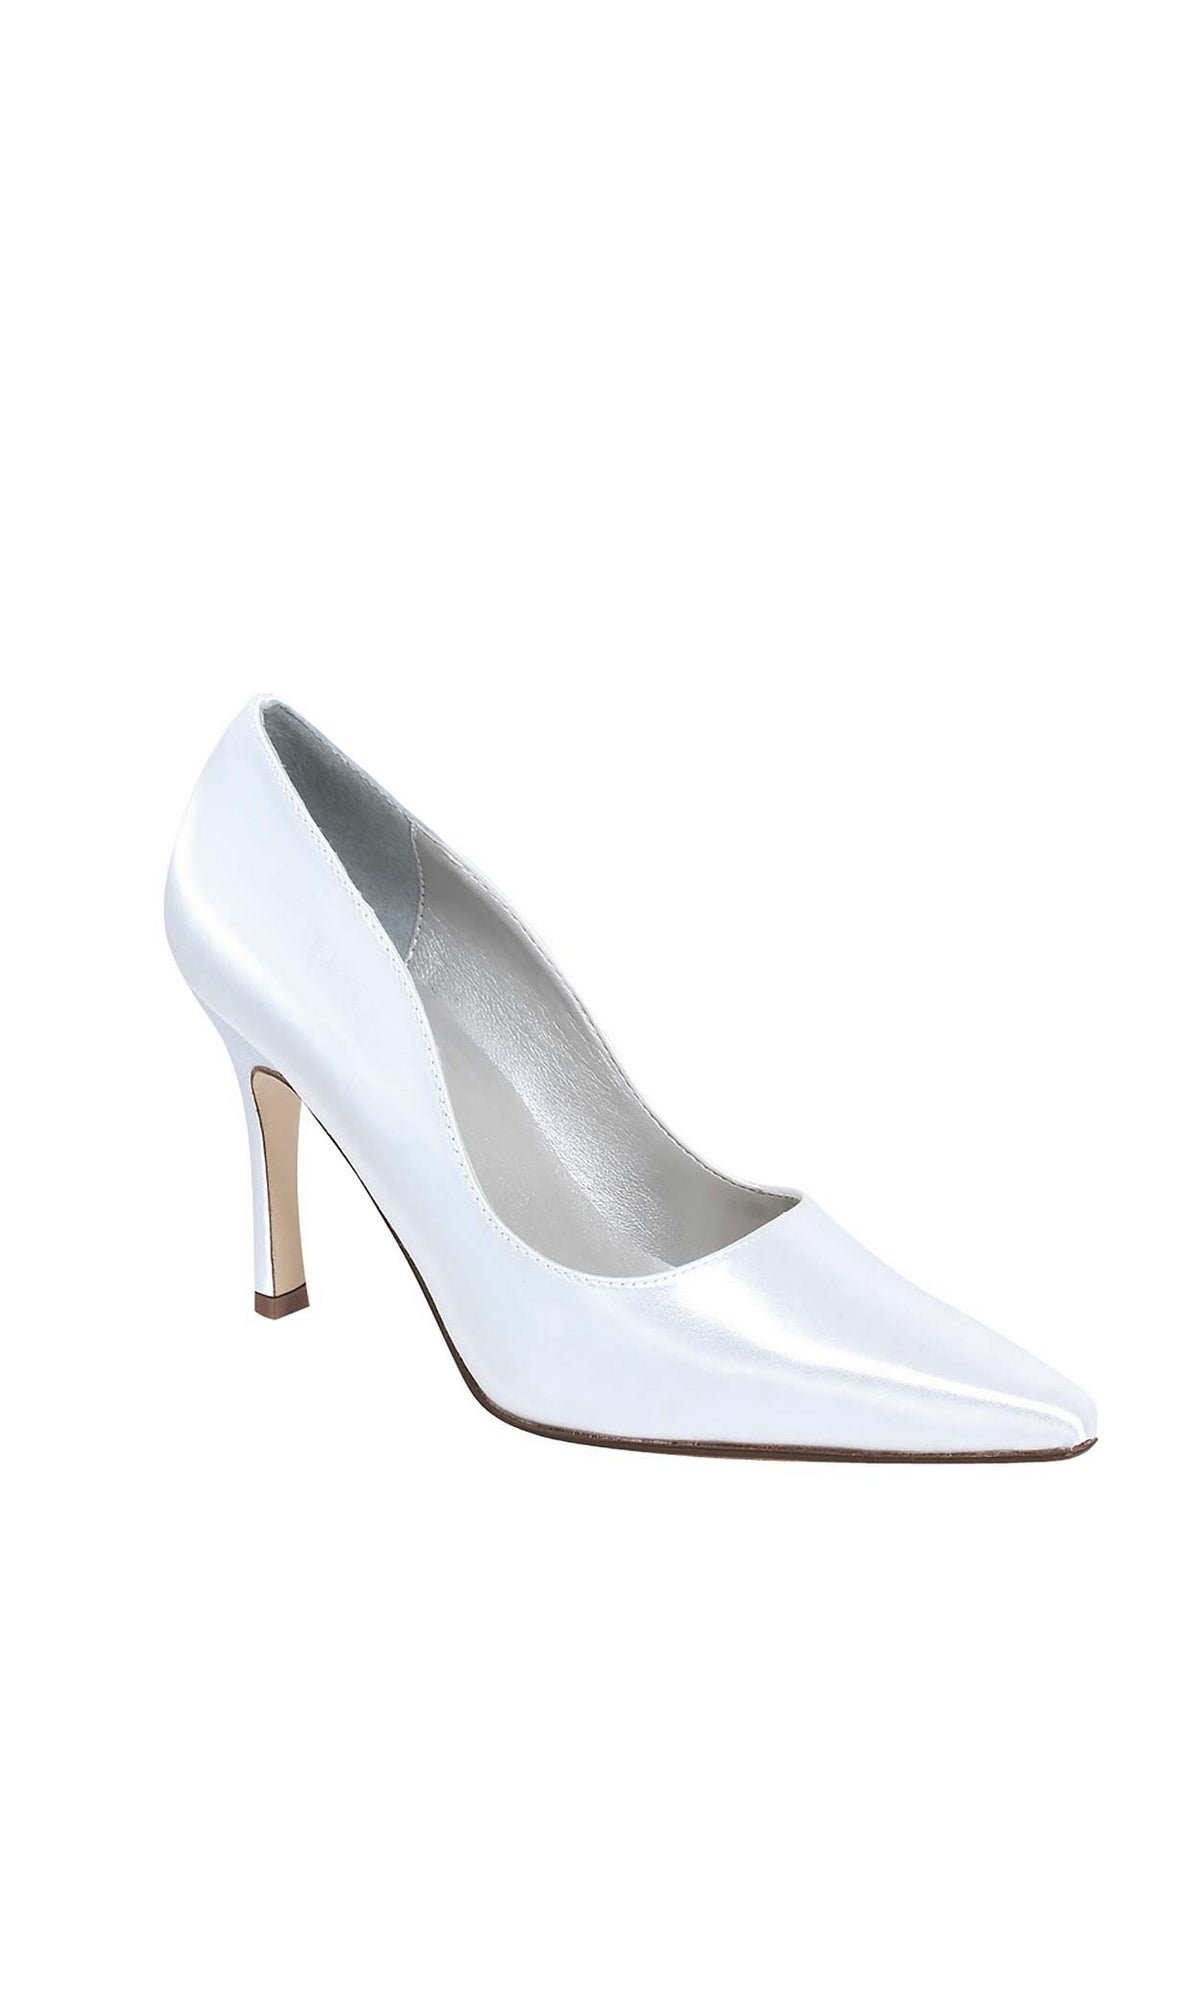 Closed Toe Pump White Prom Shoes 40309